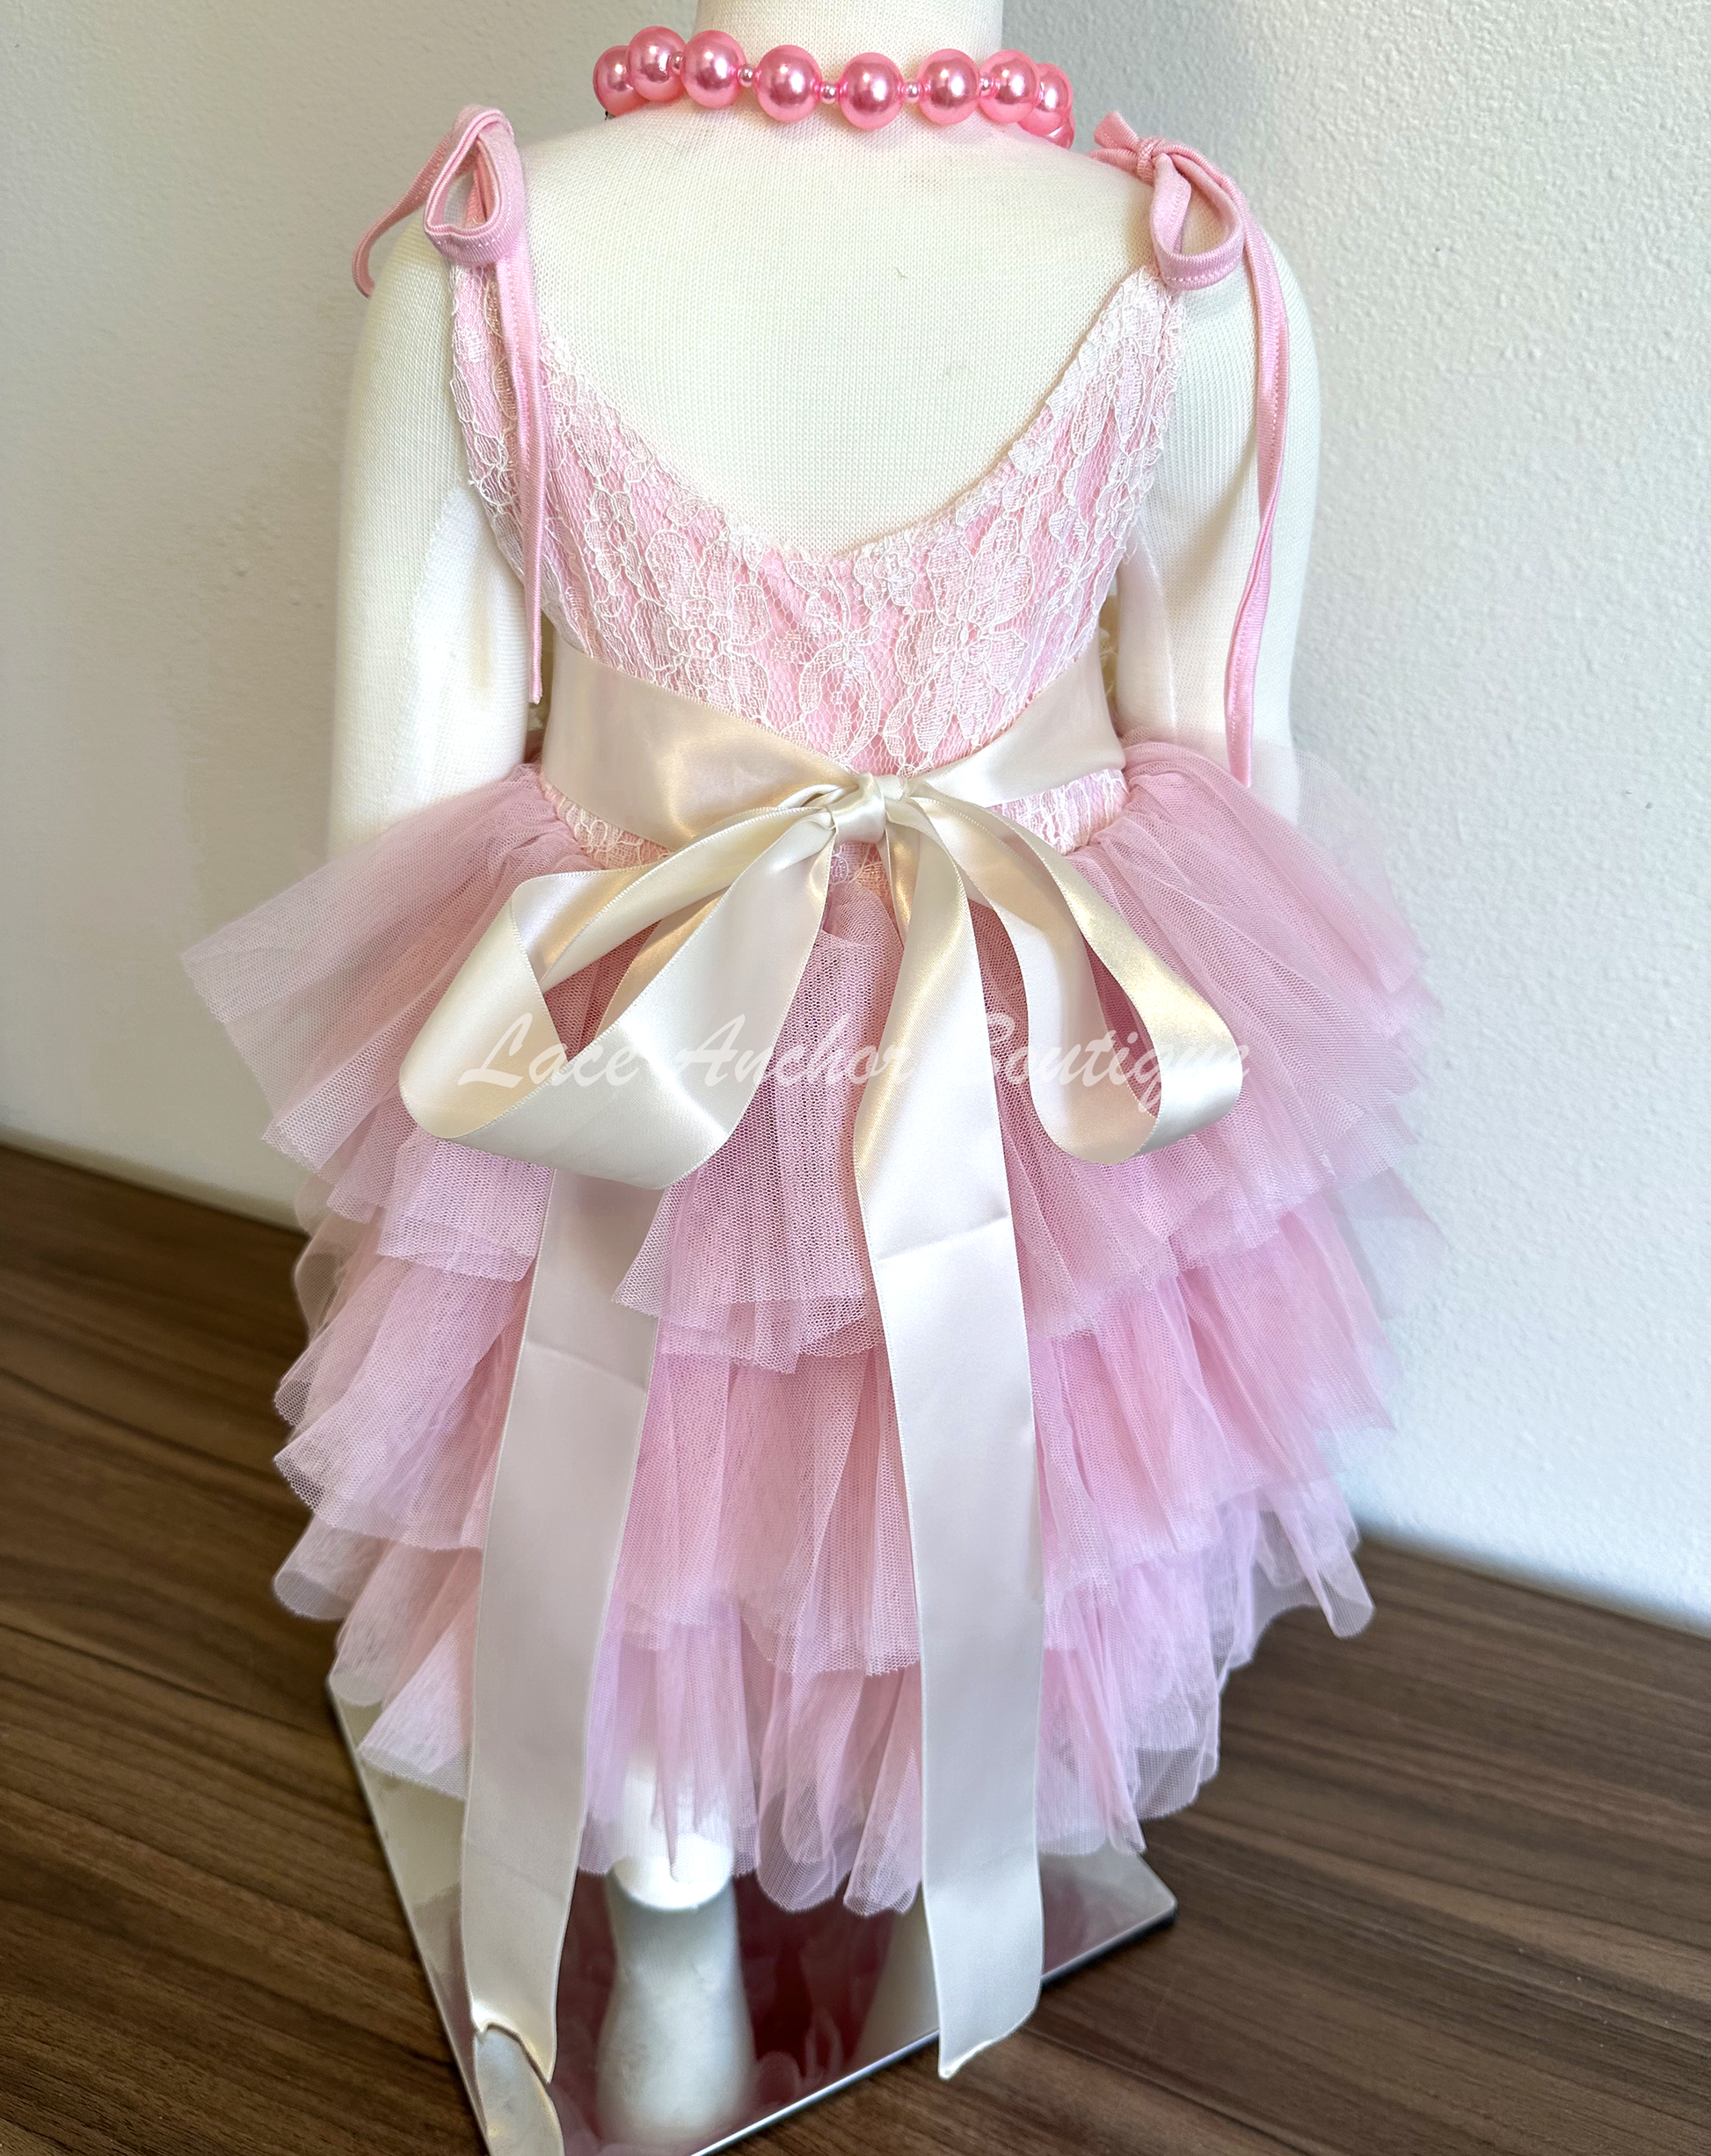 Light pink toddler girls dress with lace top, tied straps, layered ruffled tulle skirt, and silky floral tied sash. Girls flower girl dress.